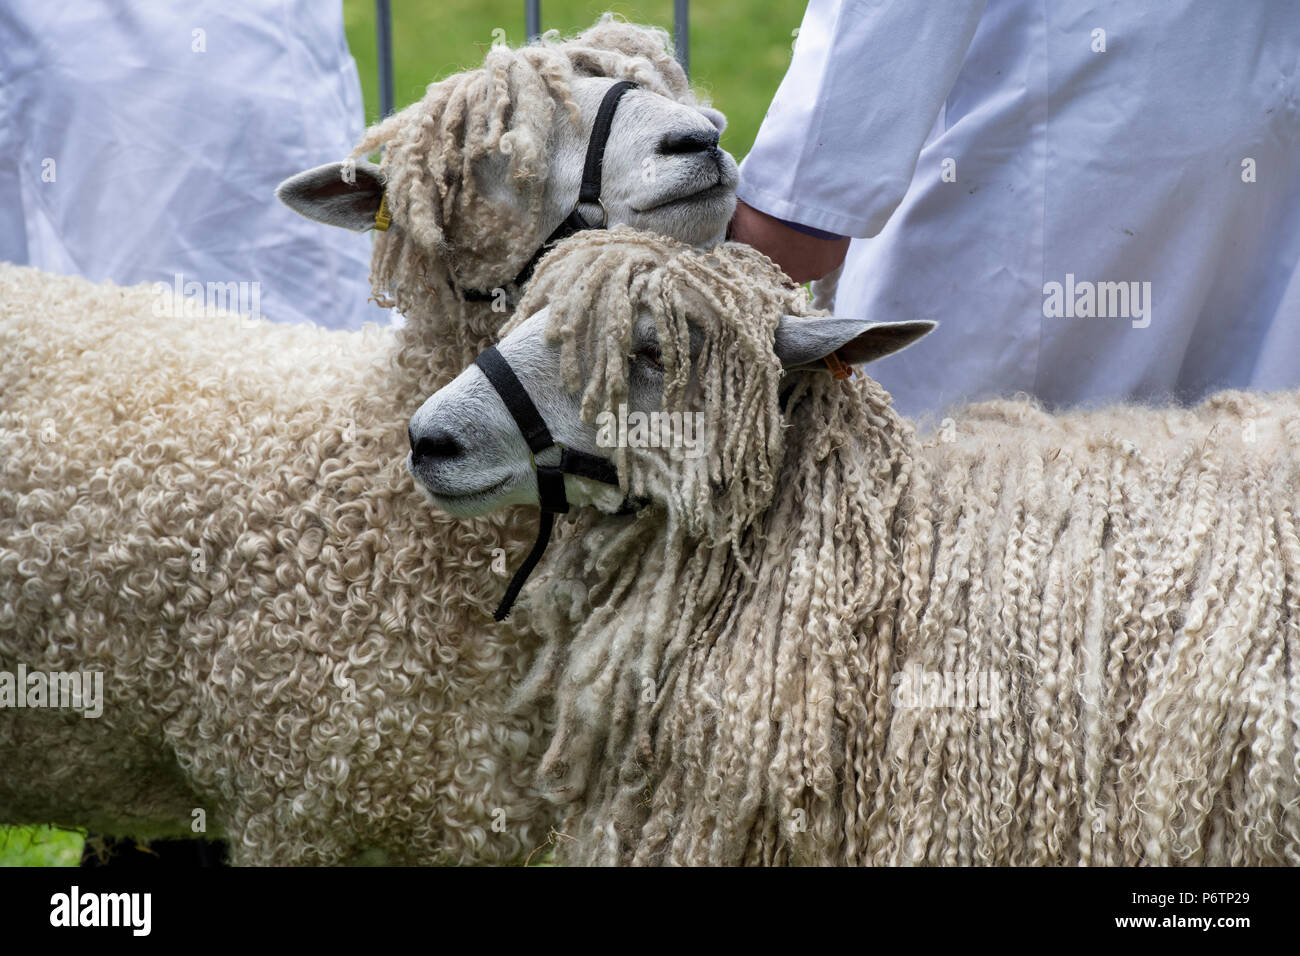 Lincoln Longwool sheep at an Agricultural show. UK Stock Photo